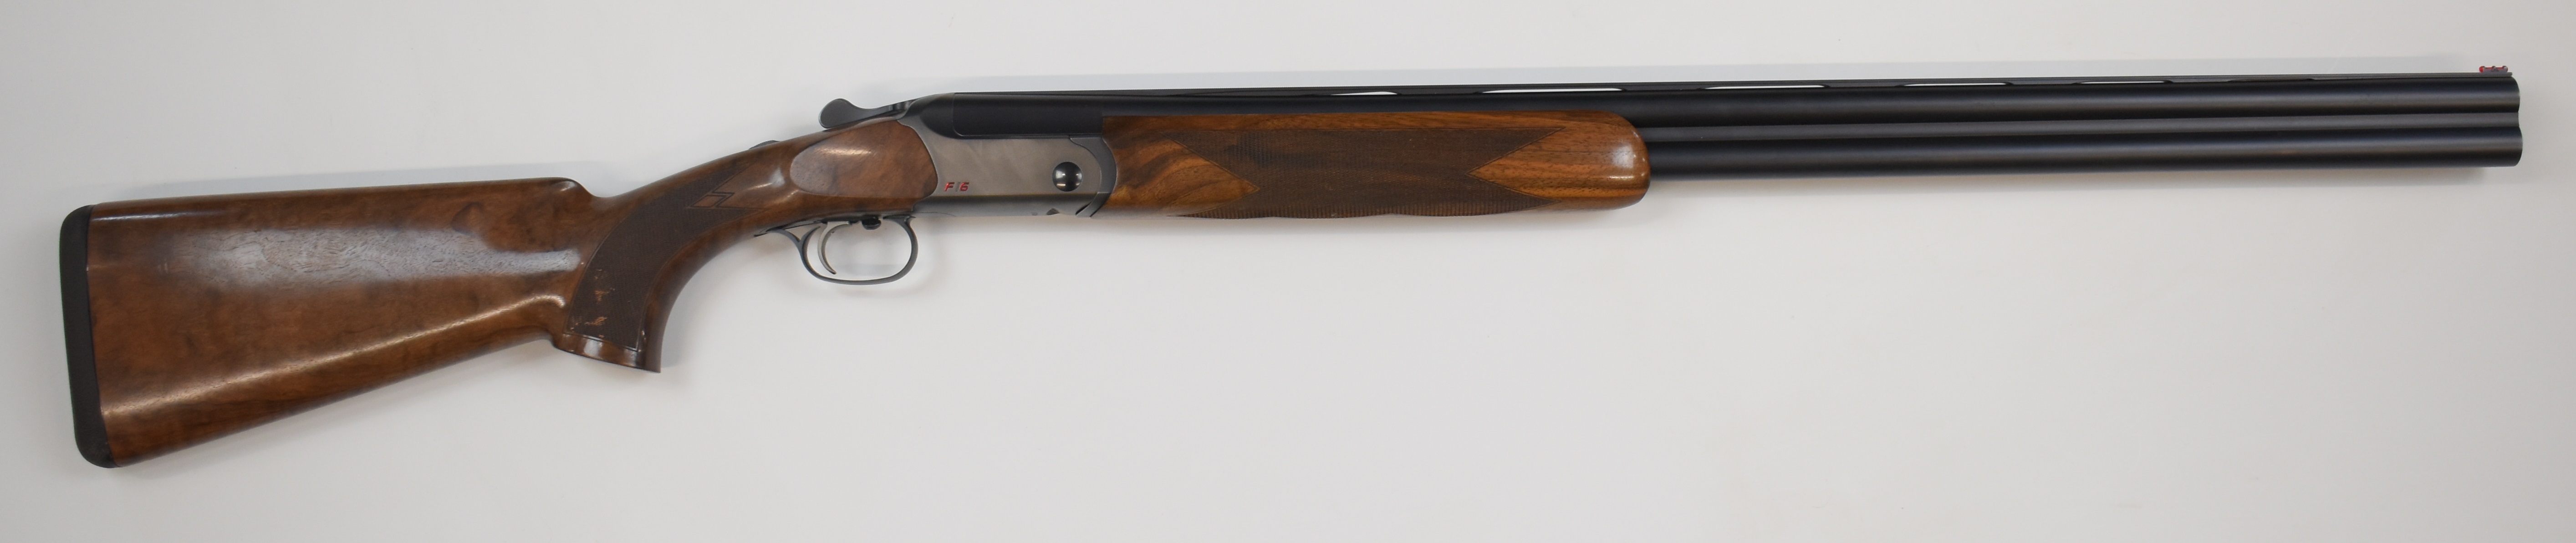 Blaser F16 12 bore over under ejector shotgun with named locks and underside, chequered semi- - Image 2 of 22